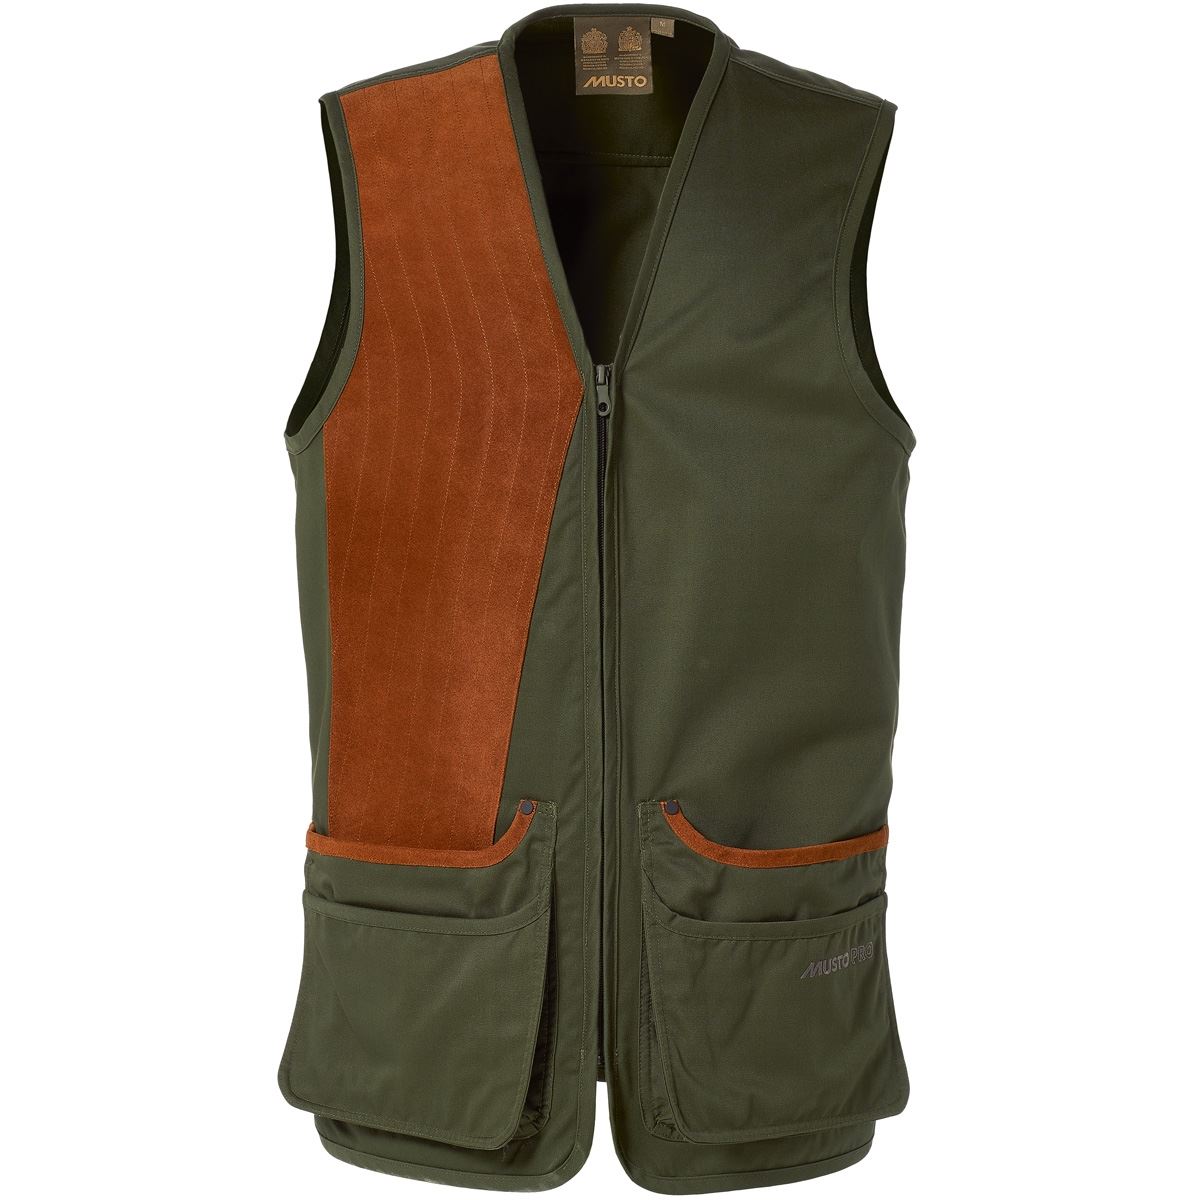 Is accessing items under the cartridge pockets easy in the Musto shooting vest?